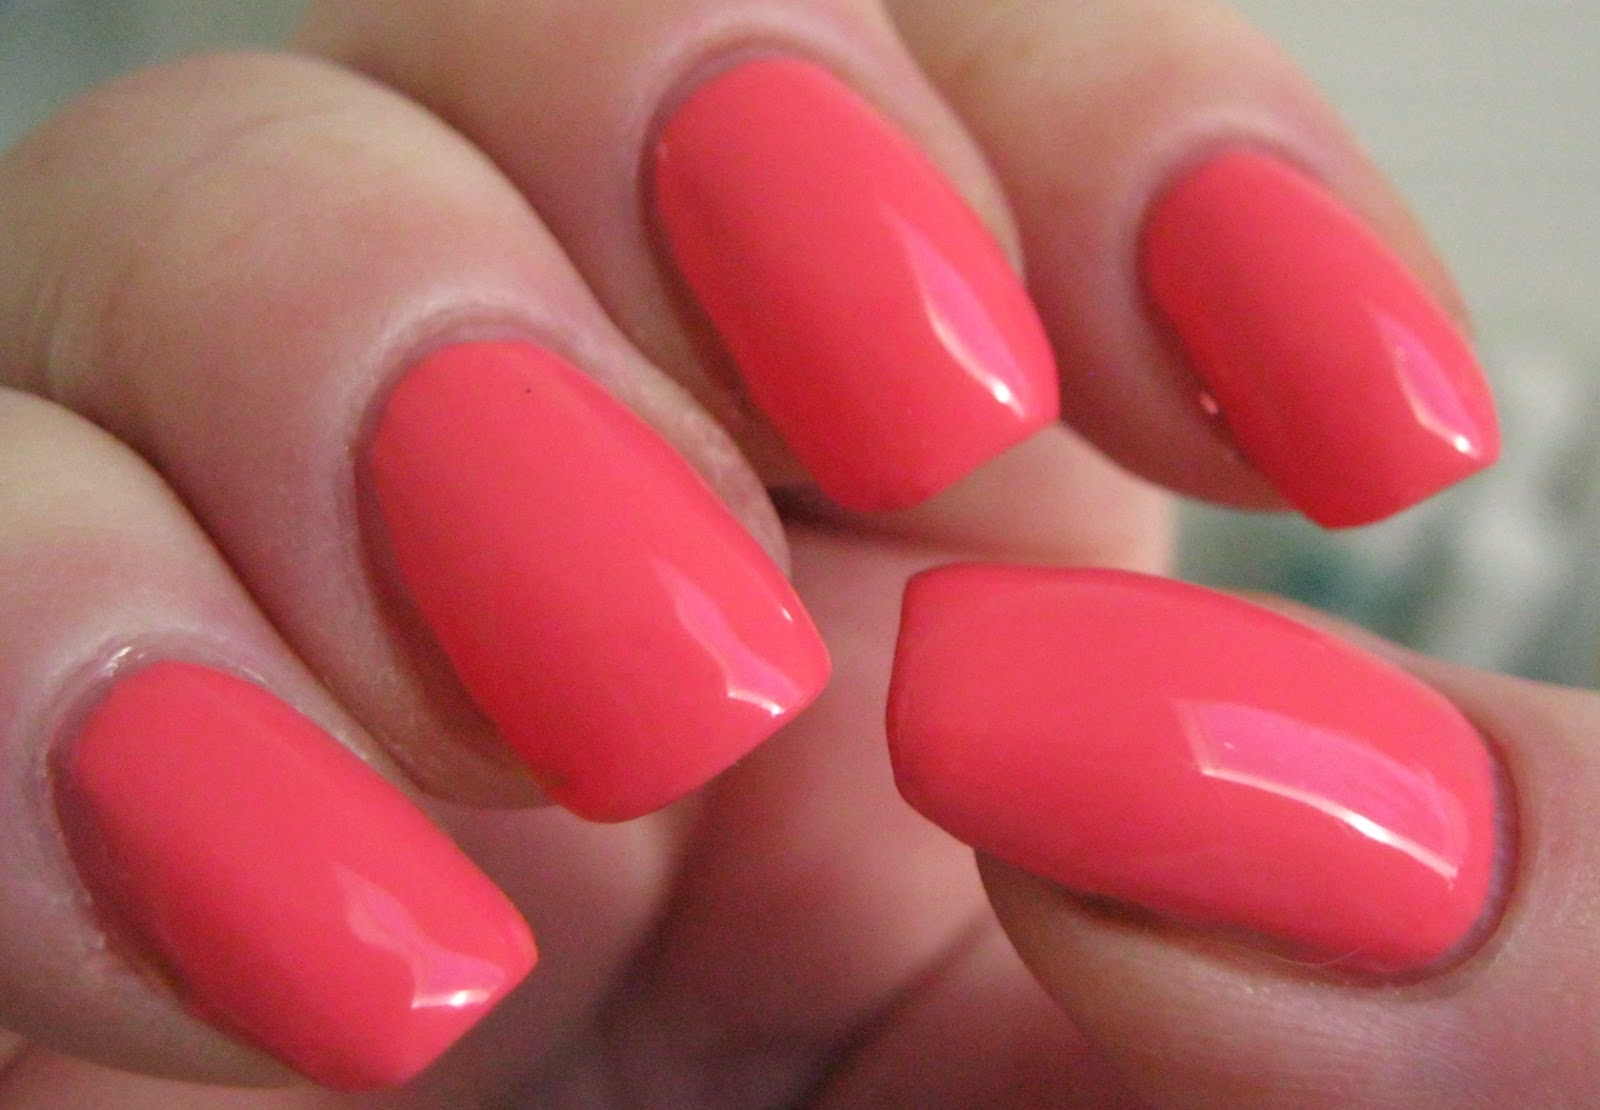 10. Butter London Nail Lacquer in "Trout Pout" - wide 1